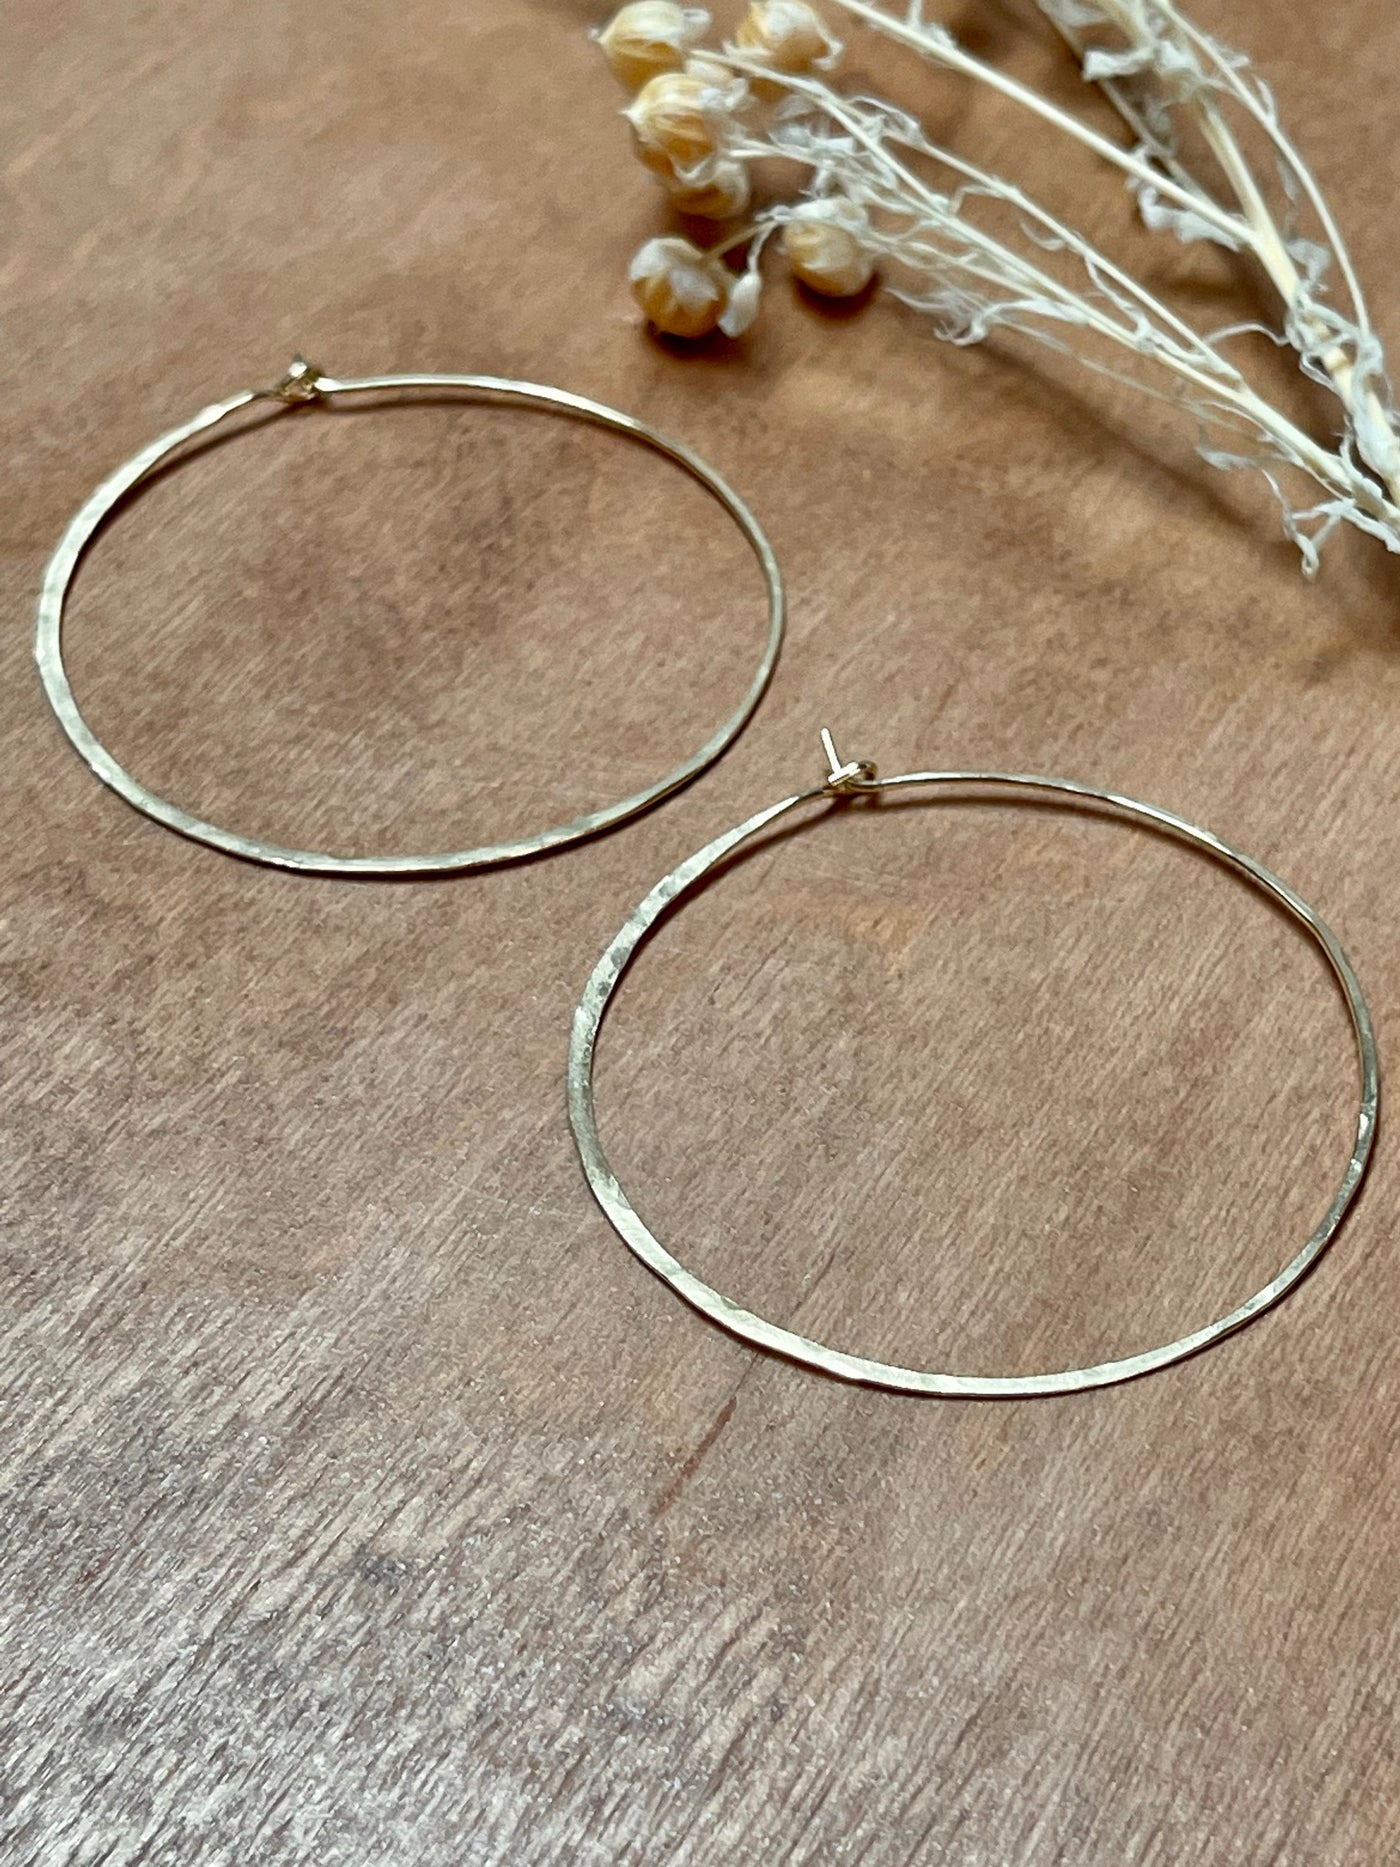 Gold Extra Large Crescent Moon Hoops. Made of lightweight hammered 14k yellow gold fill these measure 2 inches across.